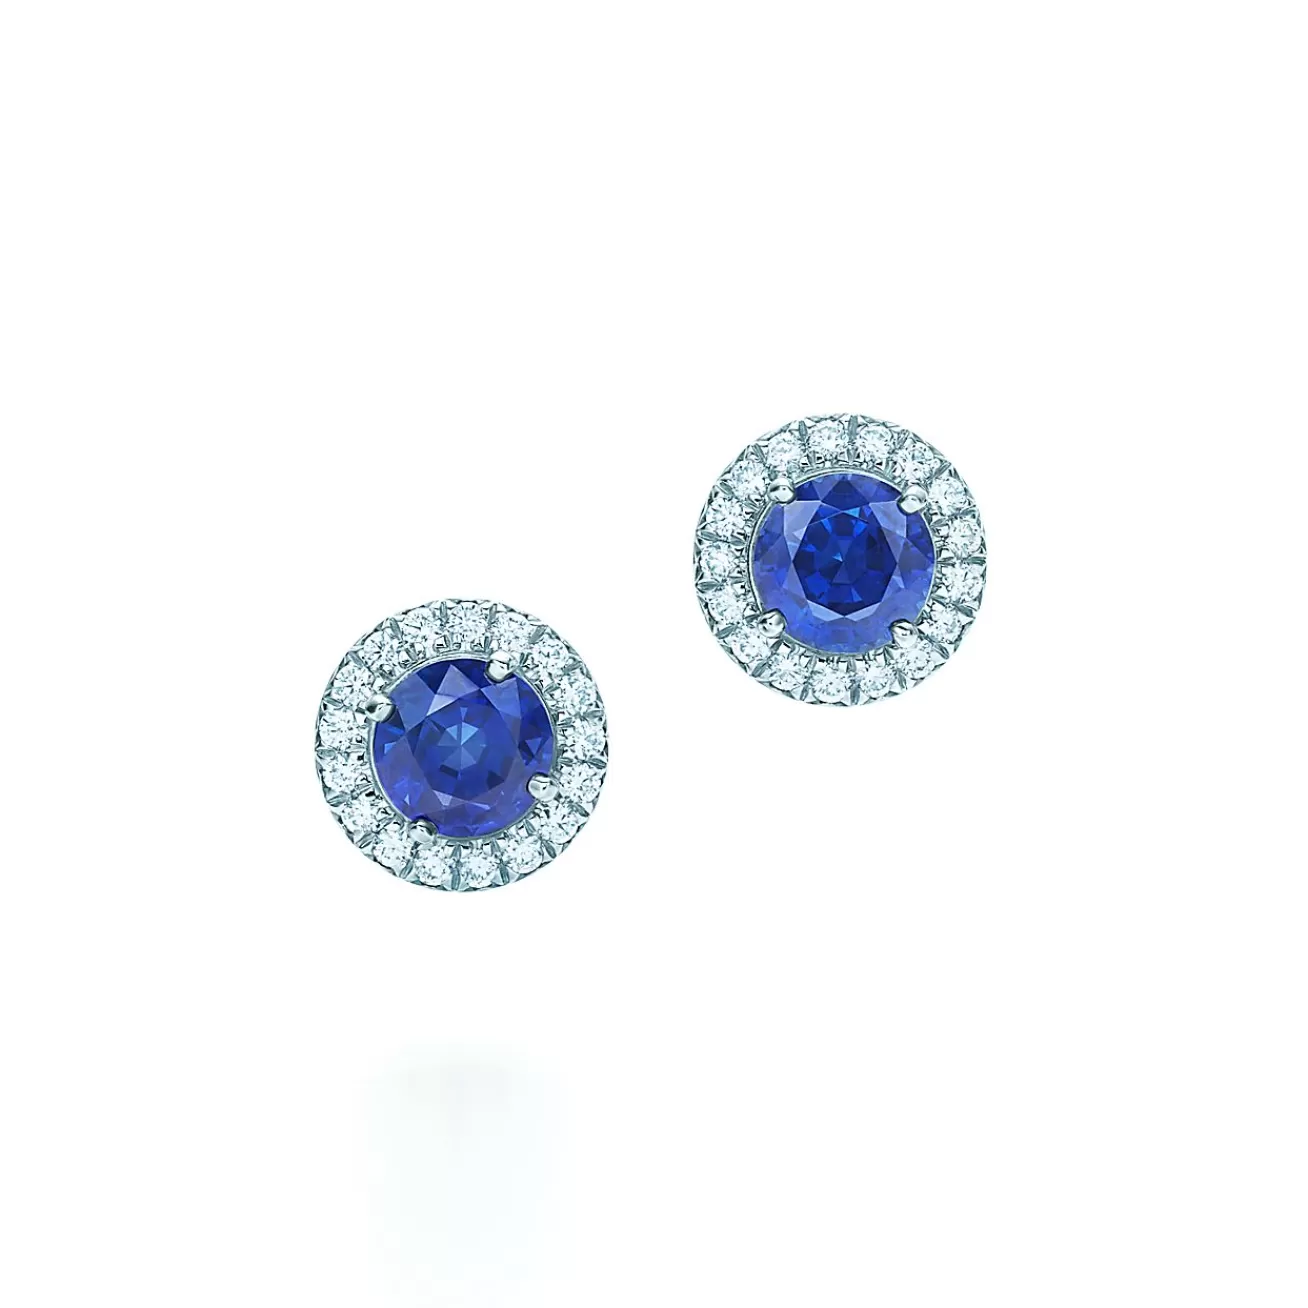 Tiffany & Co. Tiffany Soleste® earrings in platinum with sapphires and diamonds. | ^ Earrings | Platinum Jewelry